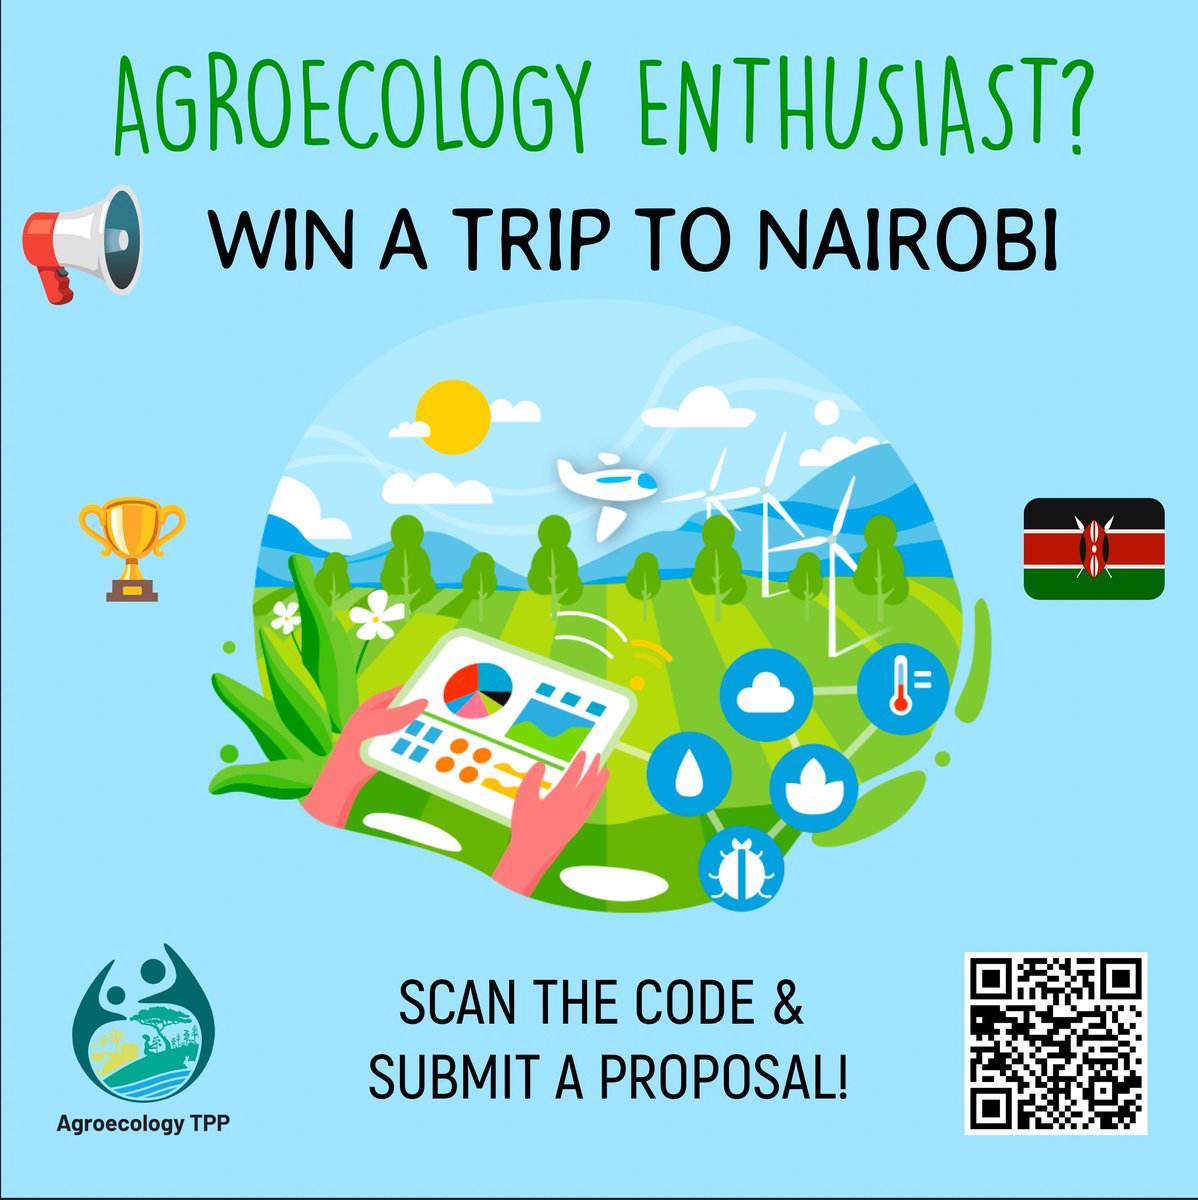 📢 Calling all #agroecology enthusiasts! Win a trip to Nairobi! The Agroecology TPP is giving away free tickets to participate in this year’s Annual Members Forum meeting, happening in Nairobi, Kenya, from 12th March. Details on how to win the tickets:🔗 bit.ly/42tx2xj